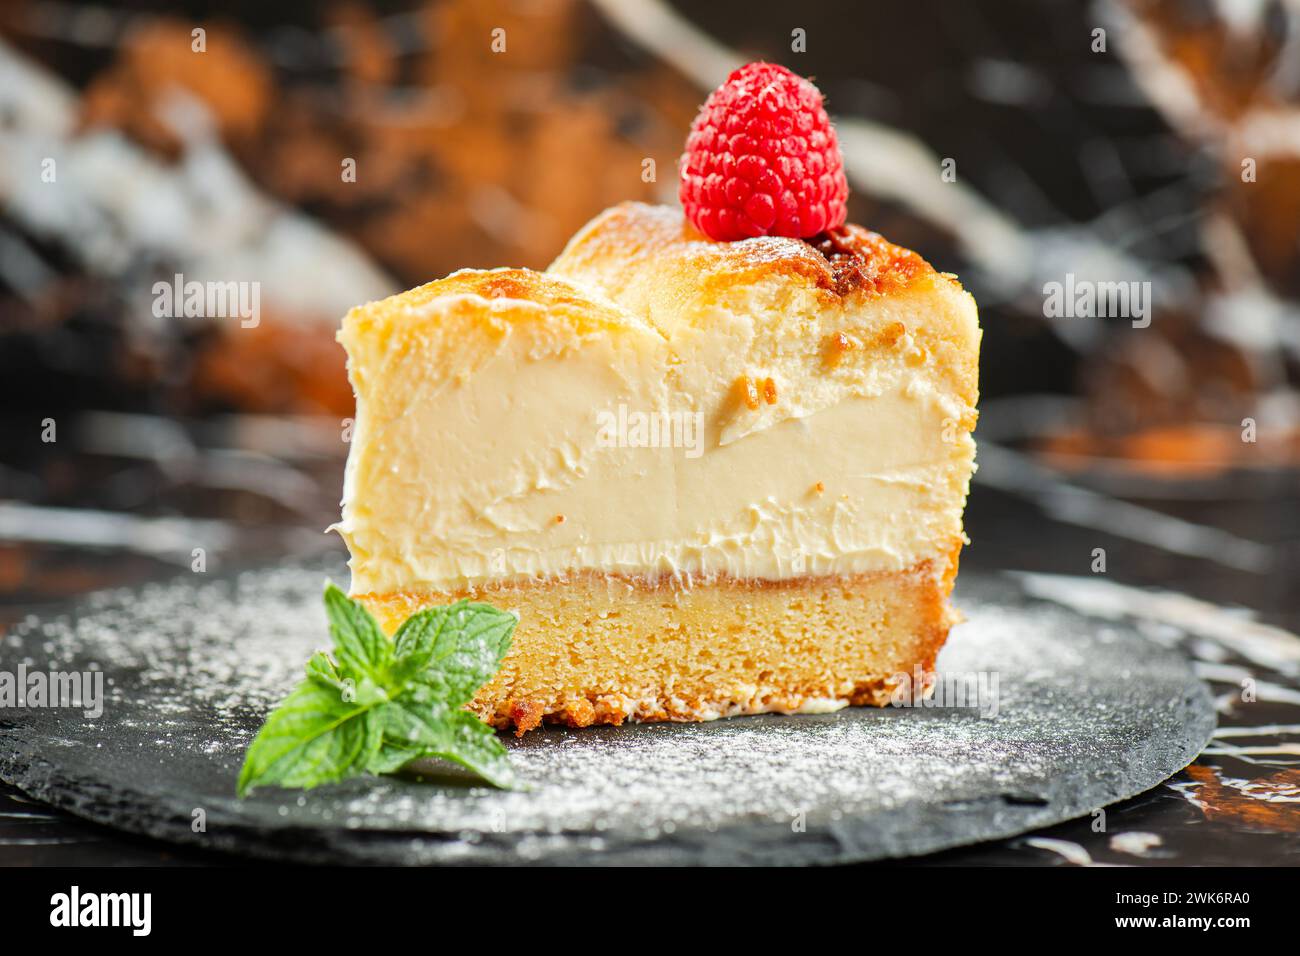 Delicious soft-baked creamy Patterson cheesecake with a spongecake base. Stock Photo